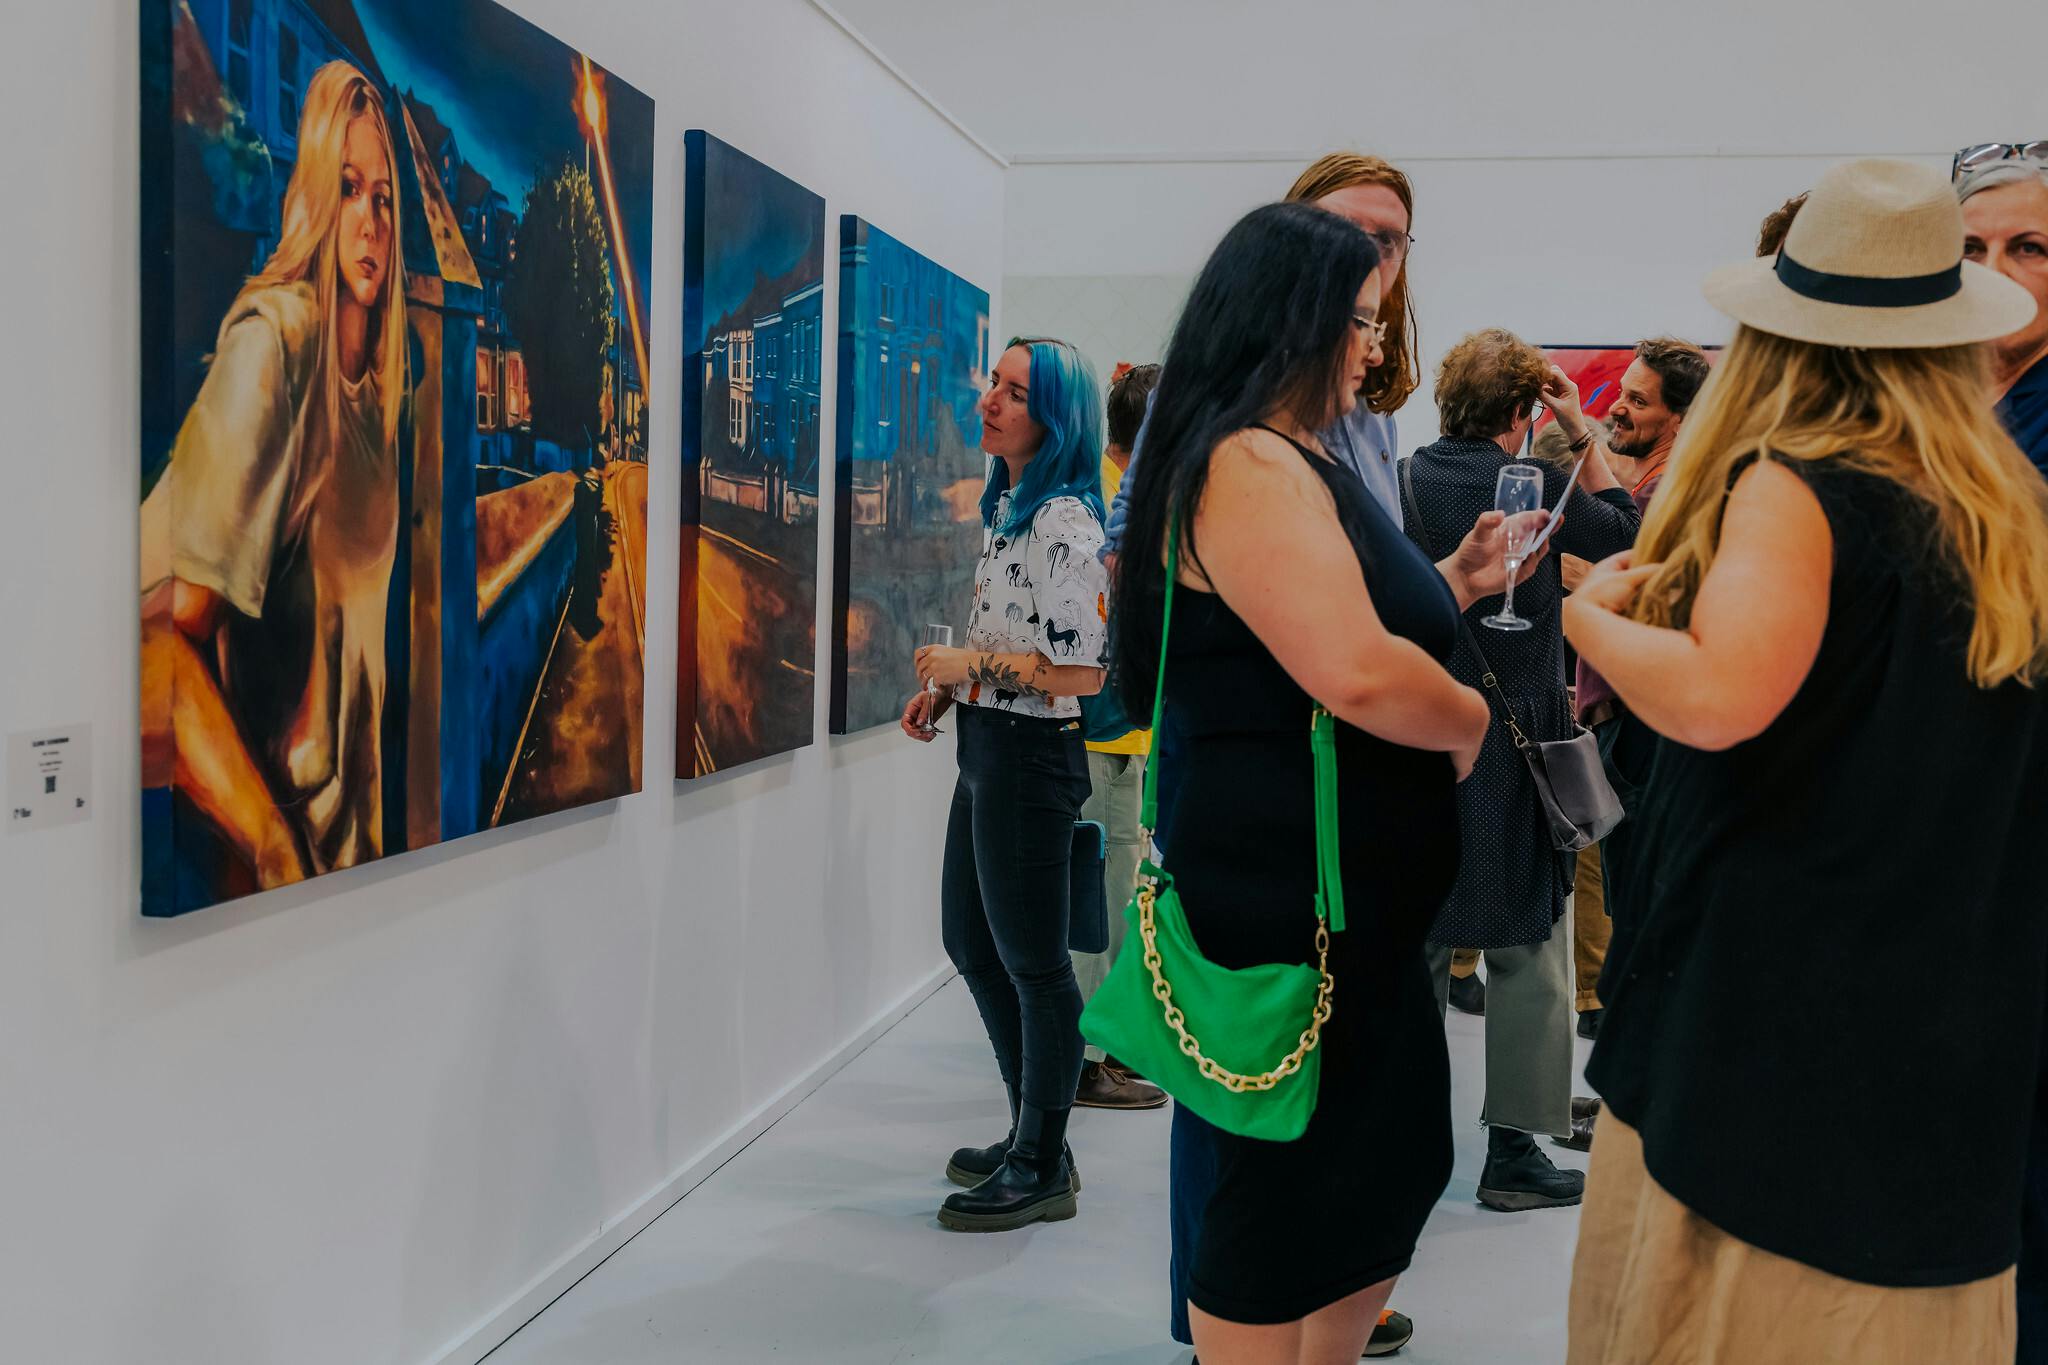 People in the foreground at an exhibition and in the background a woman with blue hair looks on at a trio of blue and orange paintings of a woman